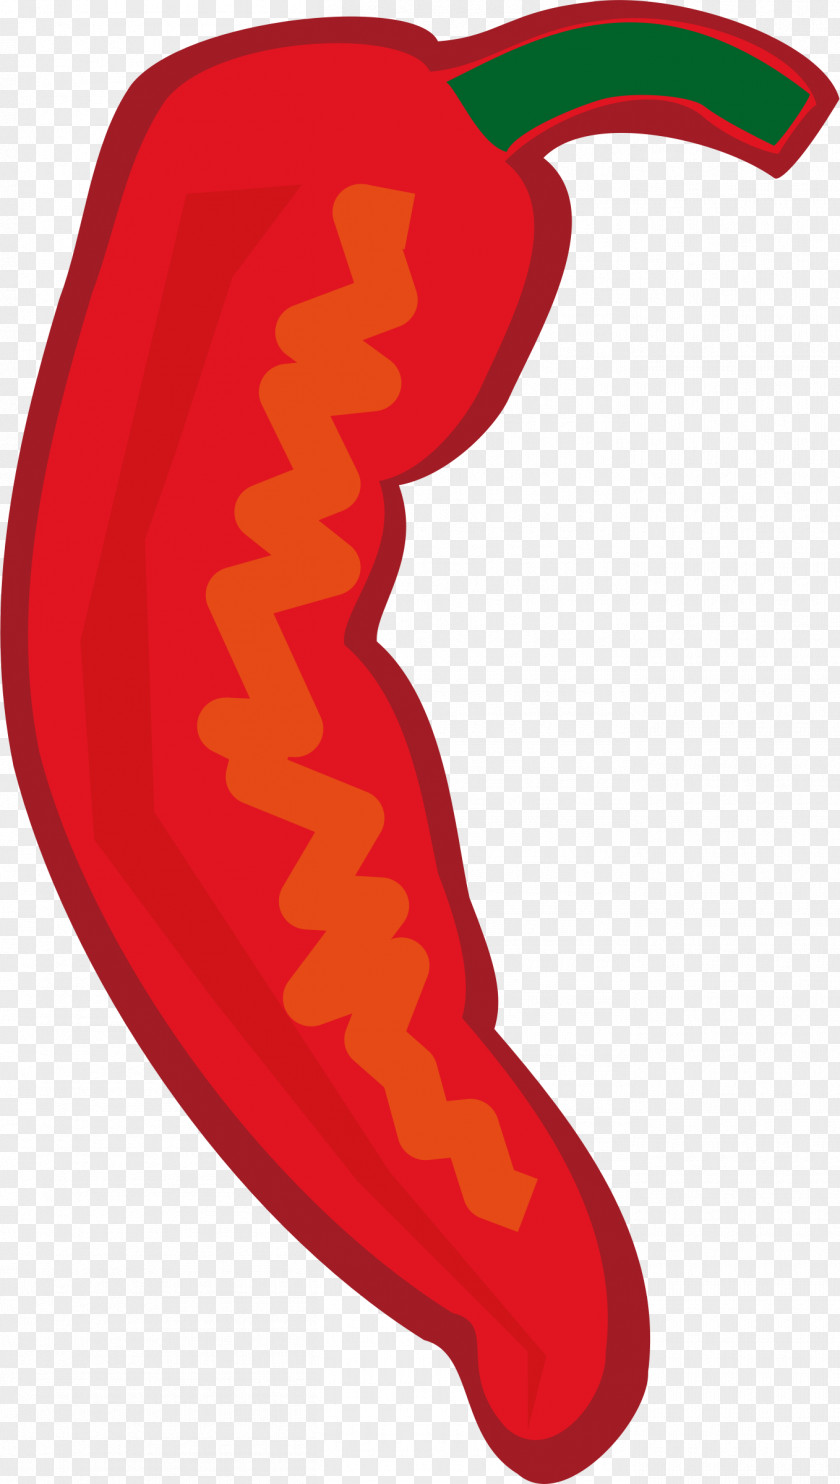 Spicy Food Vegetable Chili Pepper Fruit Clip Art PNG